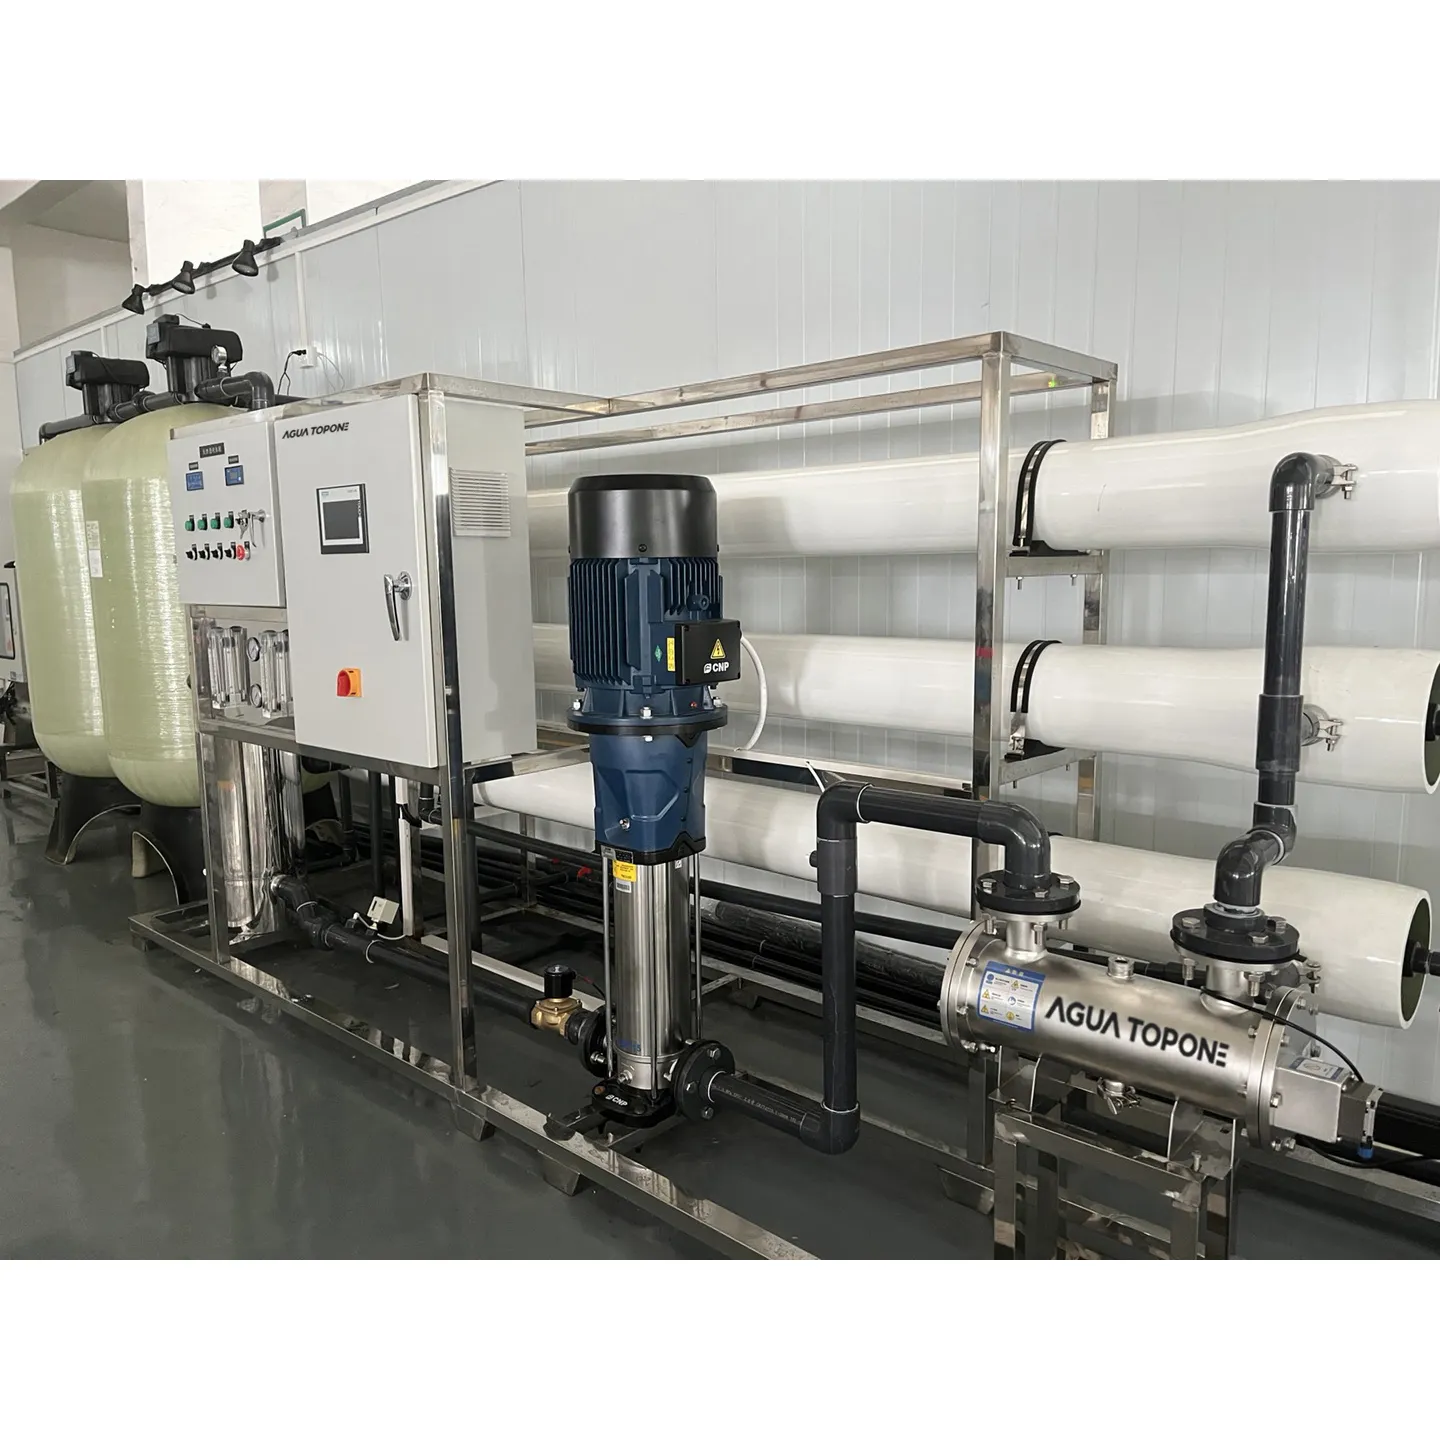 AGUA TOPONE Water Desalination Reverse Osmosis Plant Dialysis Reverse Osmosis Salt Water Treatment System